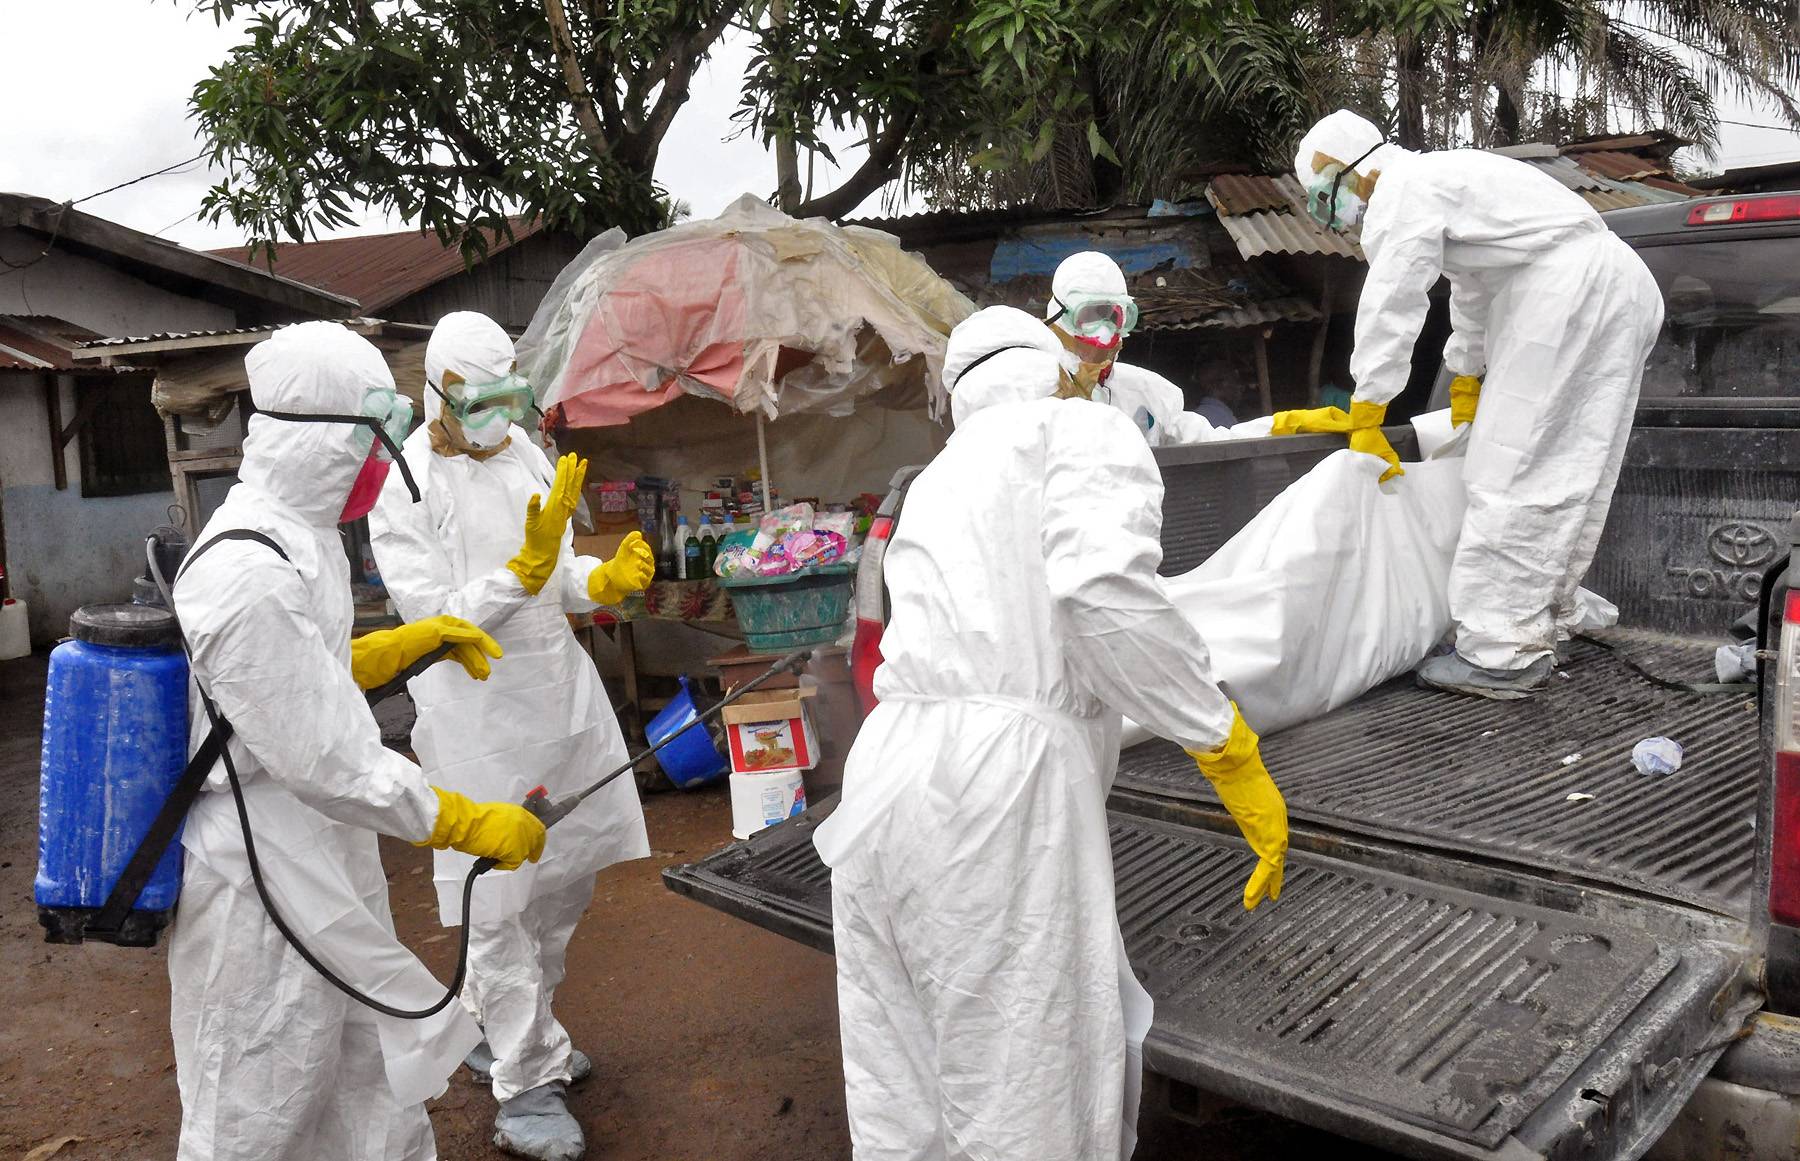 Ebola Deaths Could Reach 550,000 by January